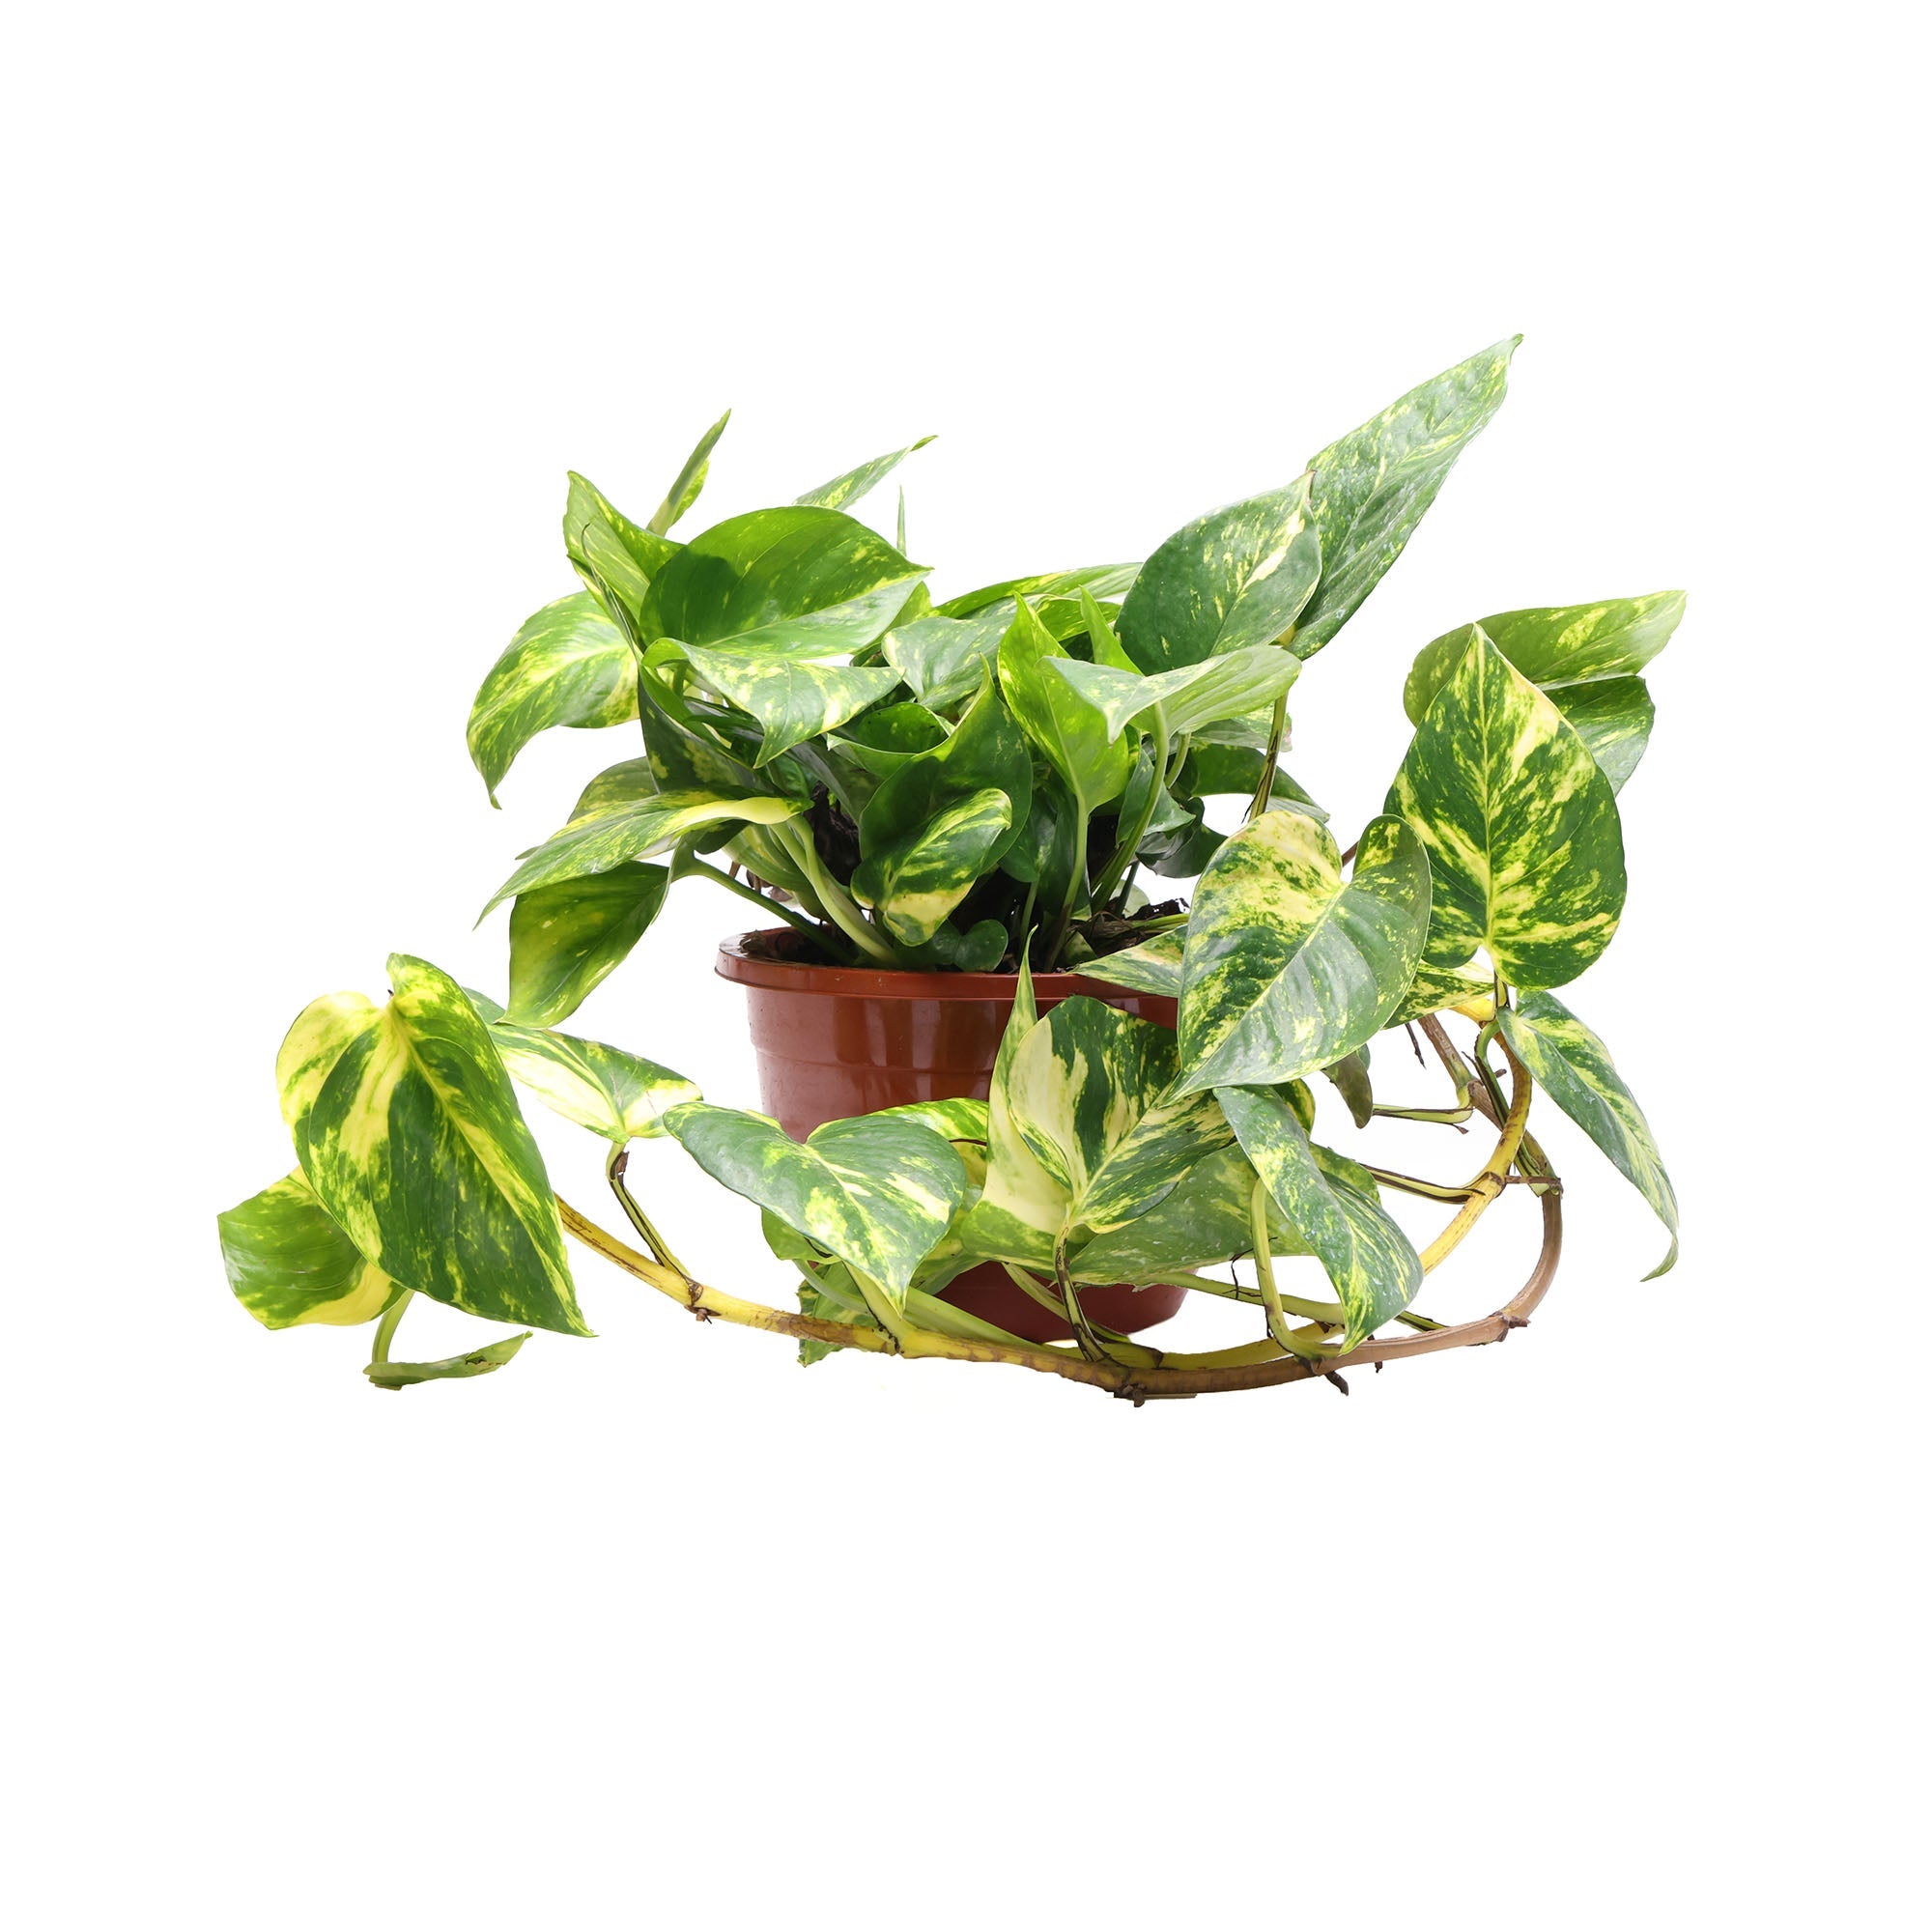 Pothos Golden 8 Inch Pot by Chive Studio 2024 in a small brown pot. The vine trails out and around the pot, with leaves displaying a mix of vibrant green and yellow patterns. Perfect for creating an indoor jungle, this air-purifying beauty stands out against the white background.